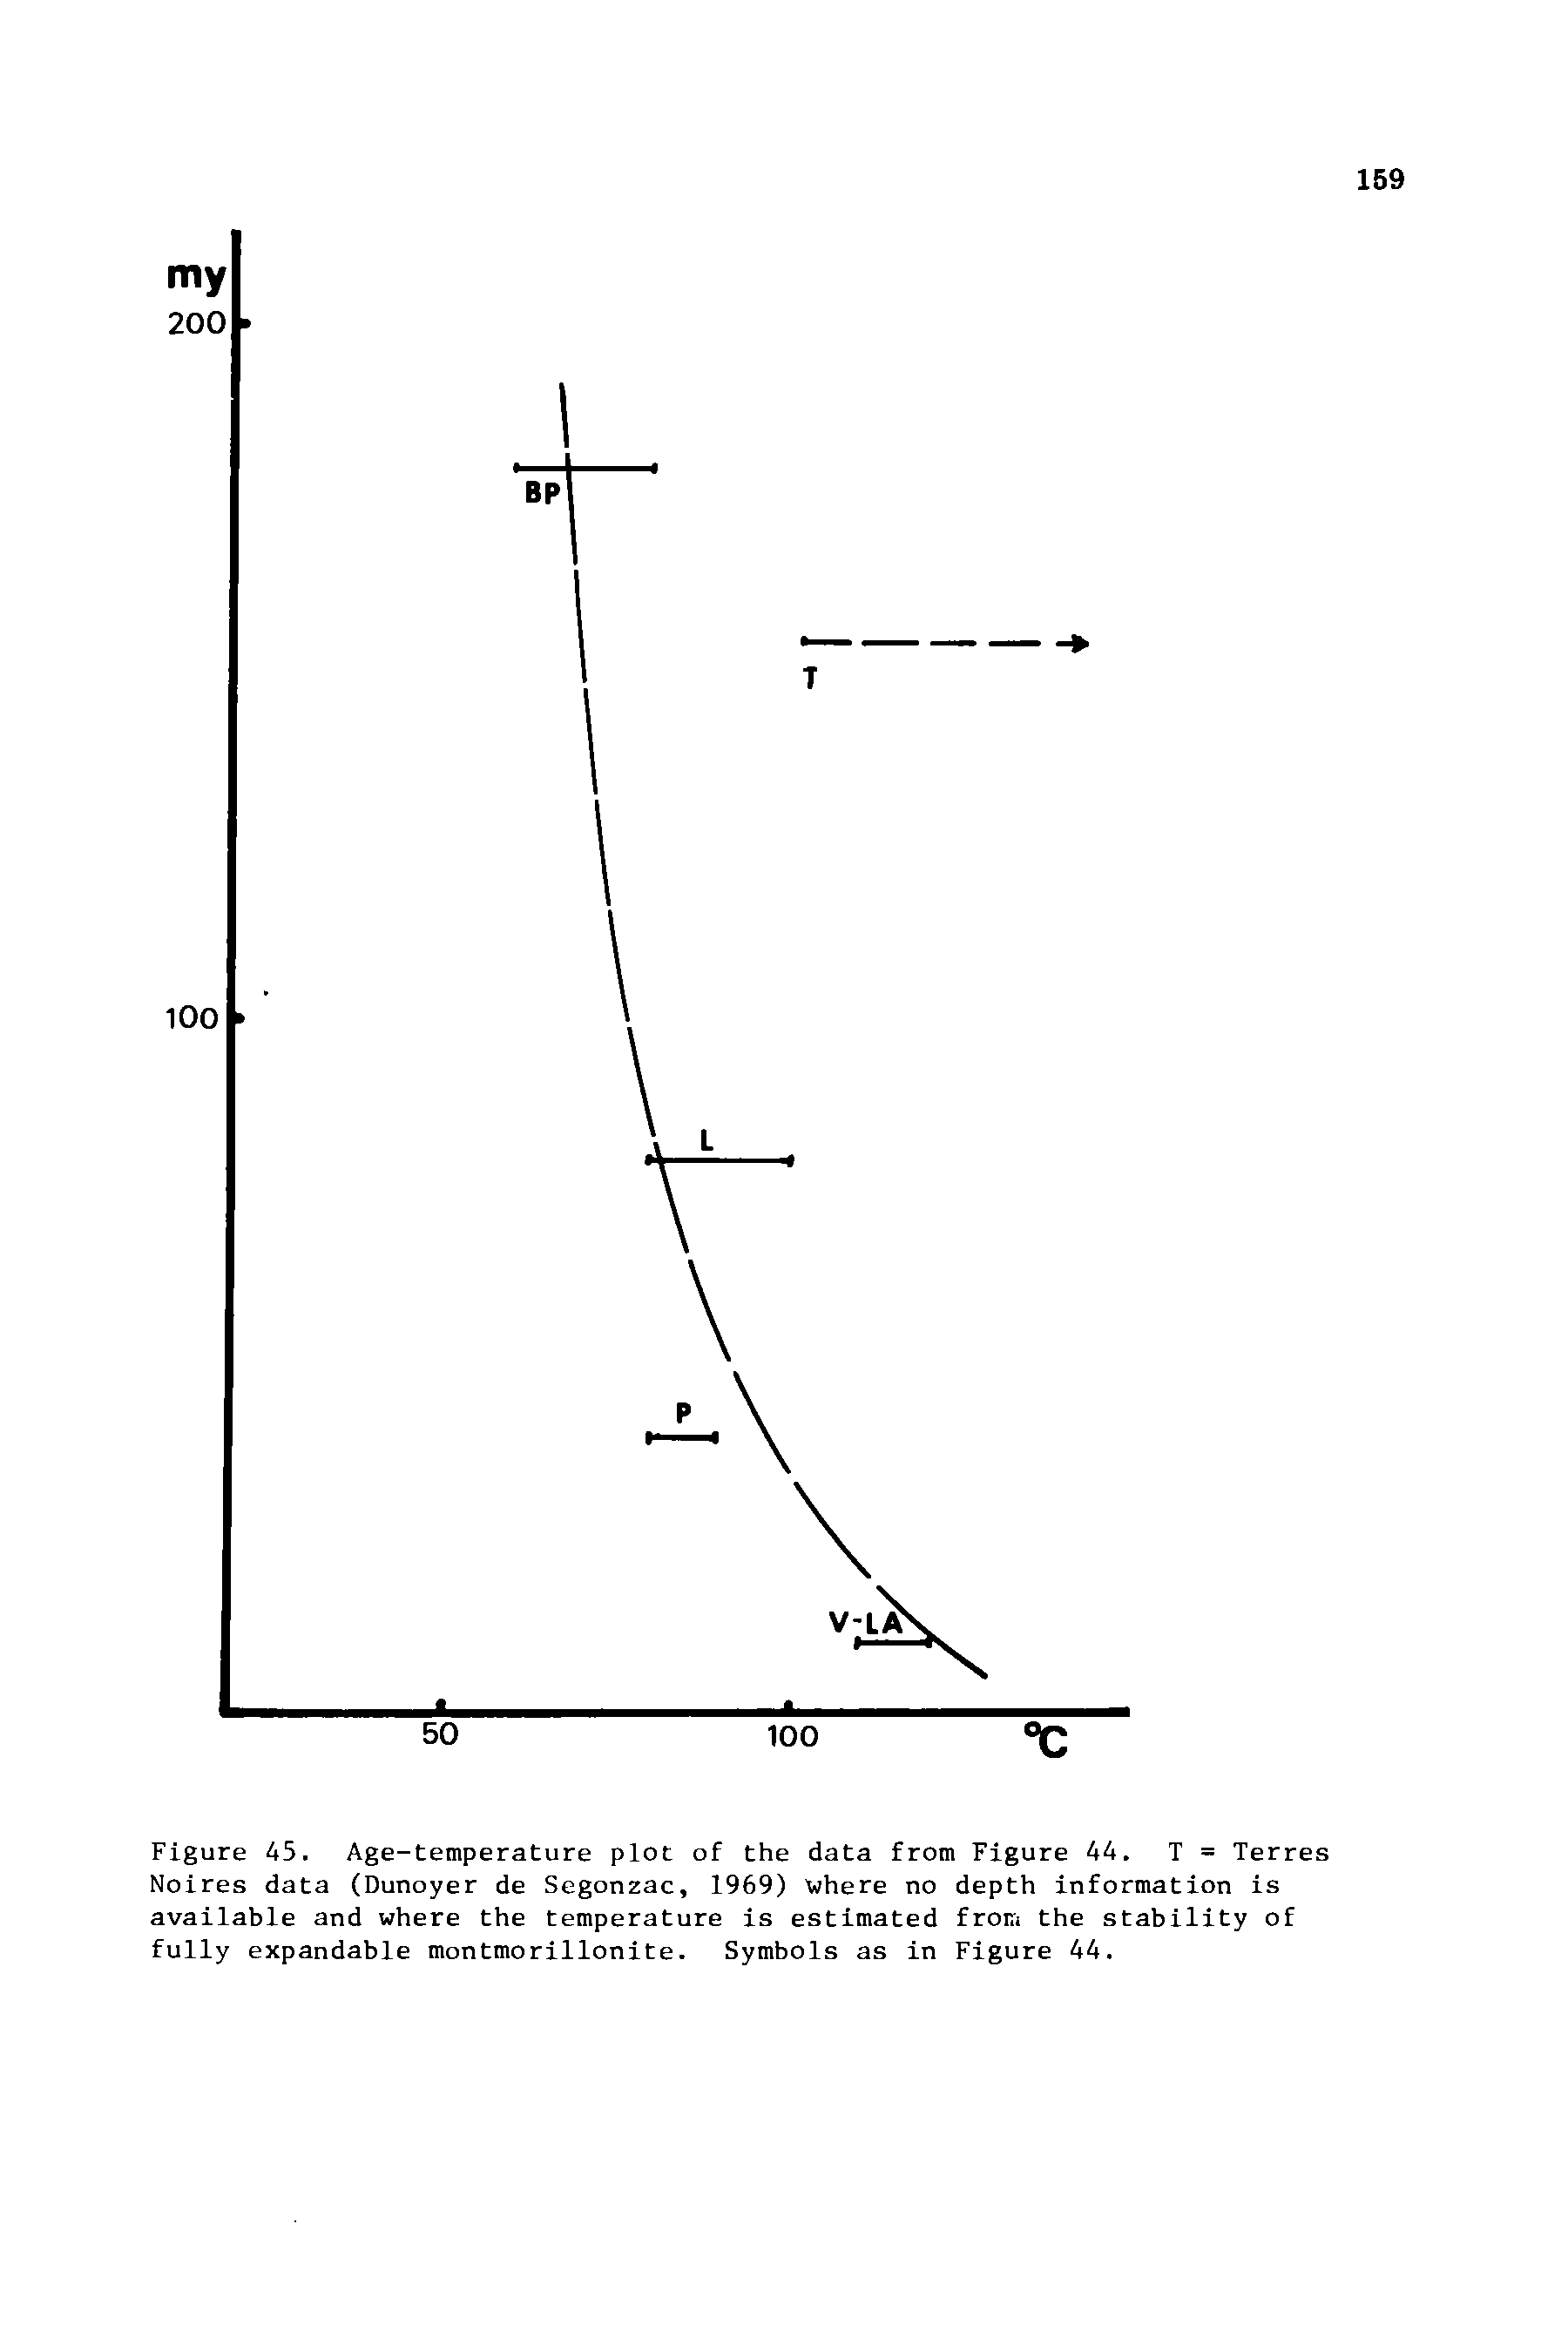 Figure 45. Age-temperature plot of the data from Figure 44. T = Terres Noires data (Dunoyer de Segonzac, 1969) v/here no depth information is available and where the temperature is estimated from the stability of fully expandable montmorillonite. Symbols as in Figure 44.